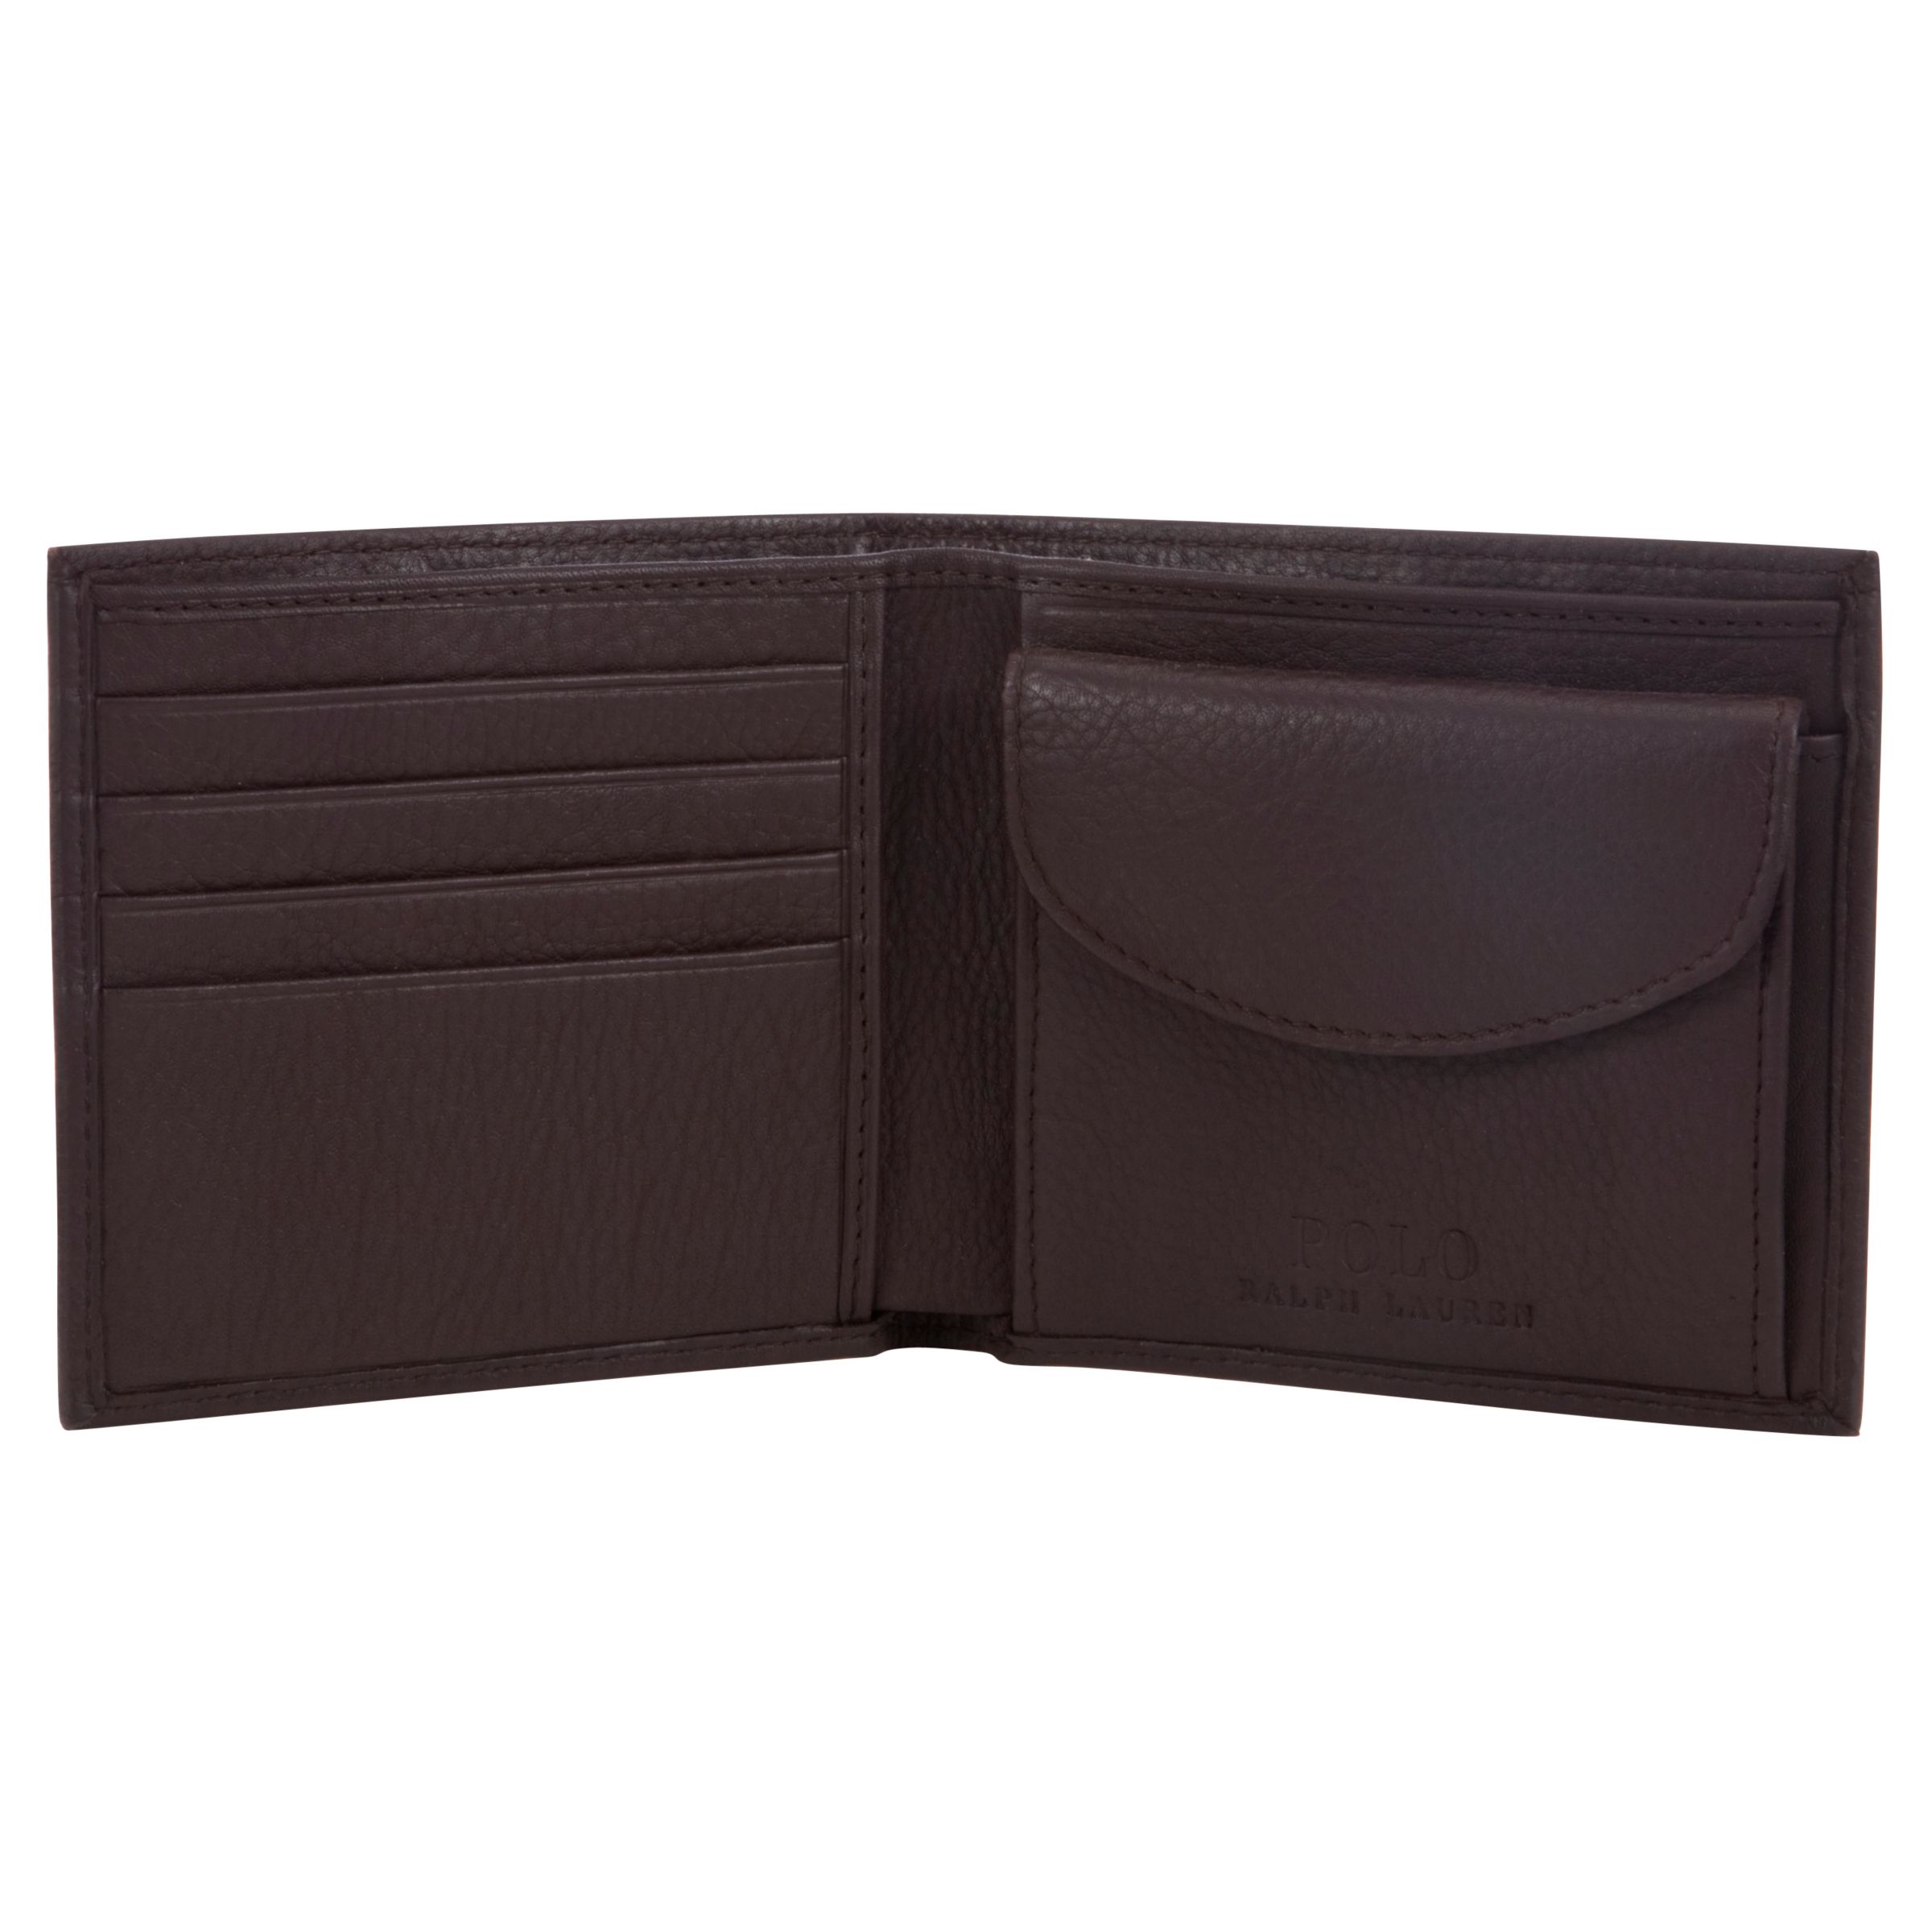 Polo Ralph Lauren Pebble Leather Wallet, Brown at John Lewis & Partners